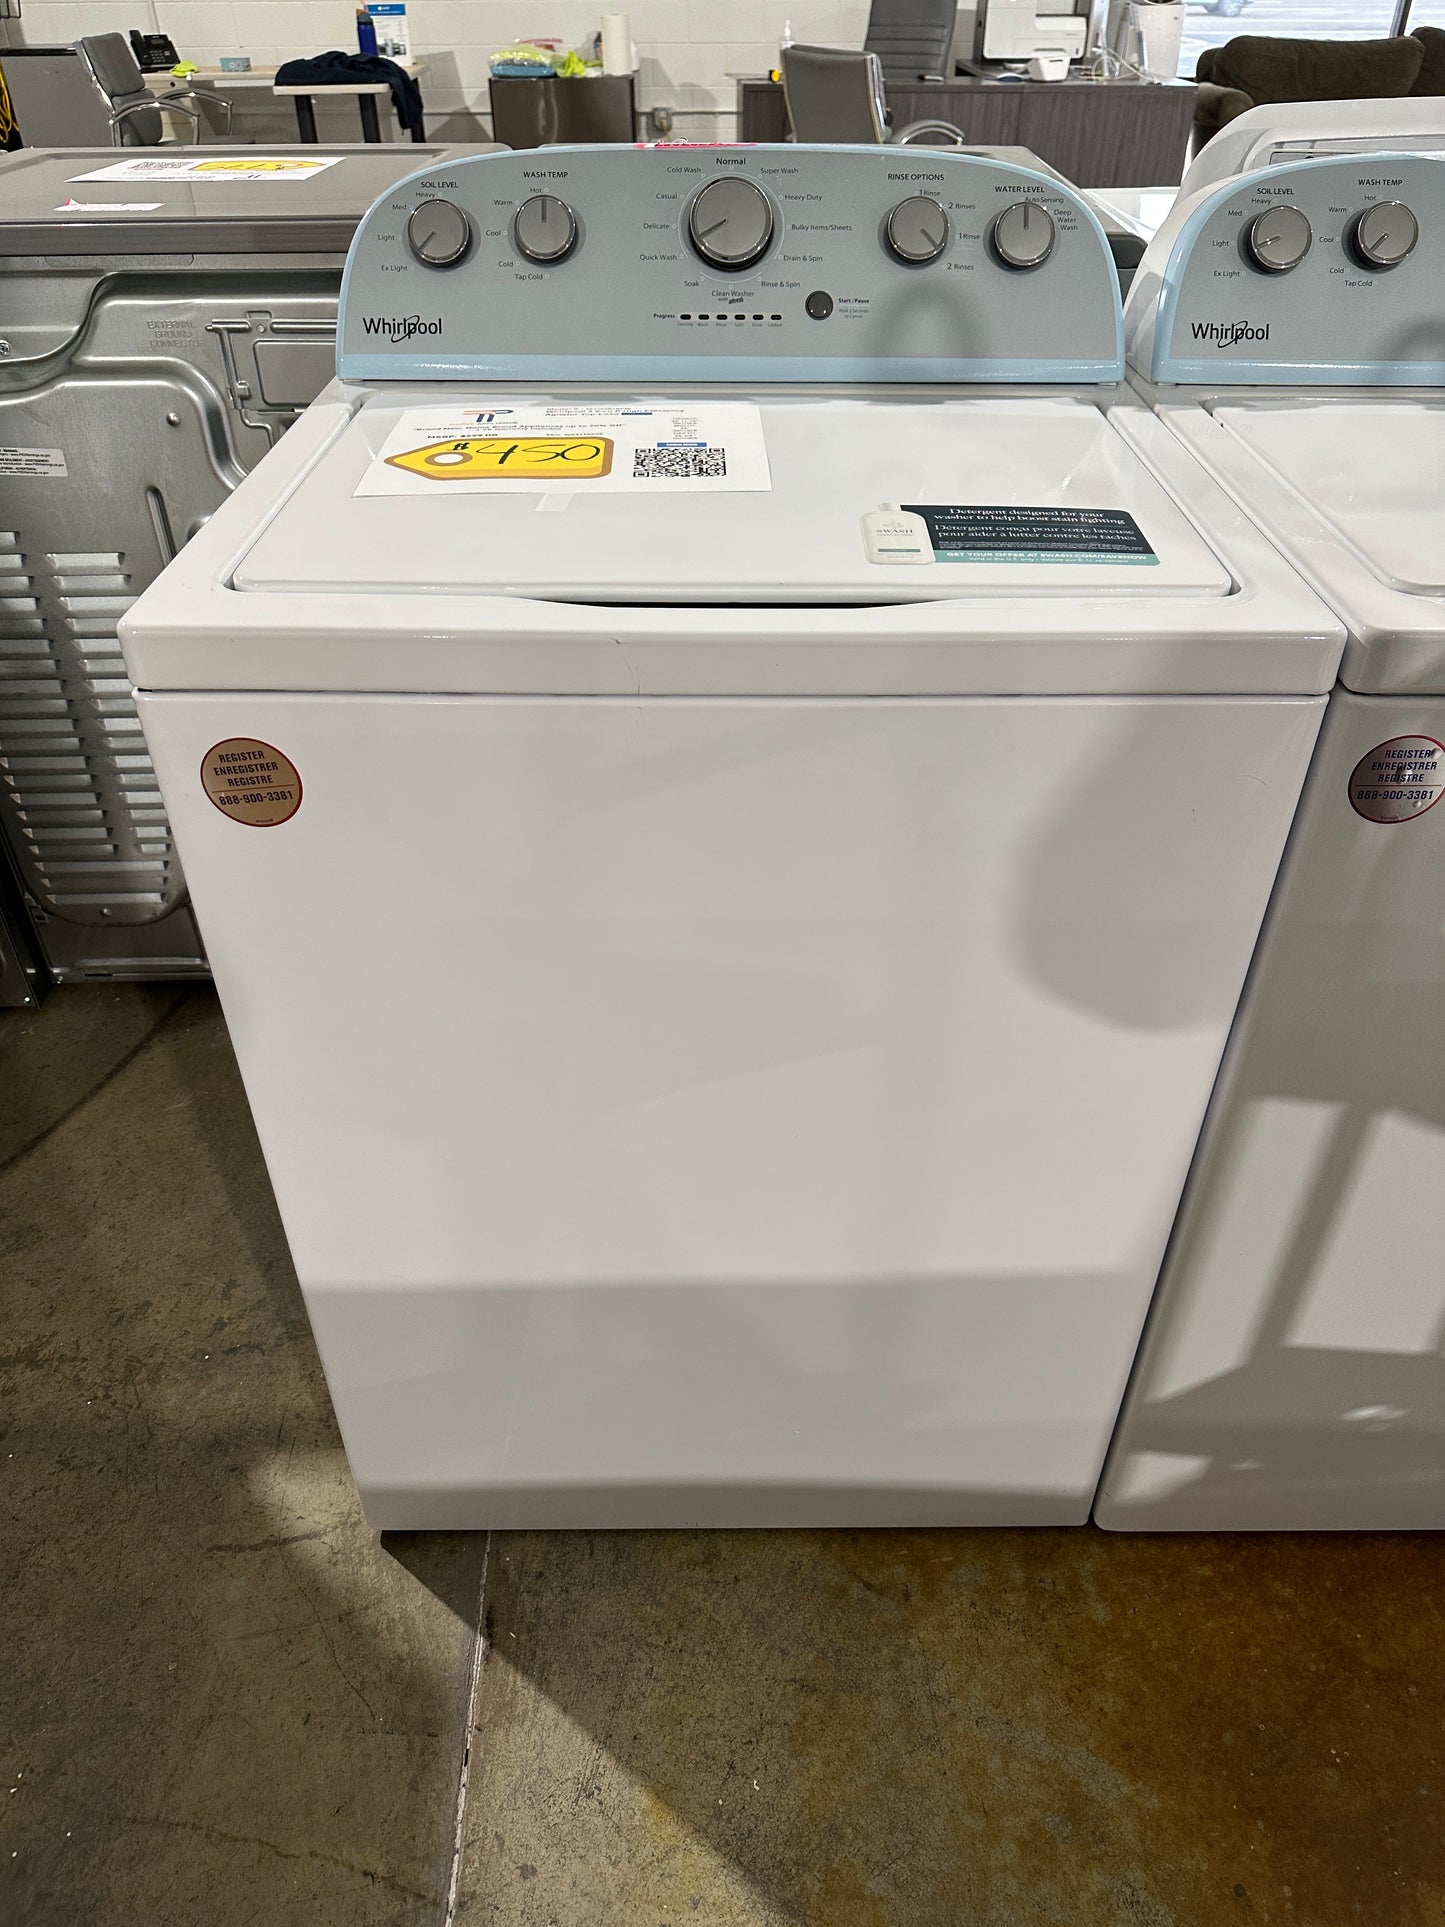 12-CYCLE TOP-LOADING WASHING MACHINE - WAS11860S WTW4816FW